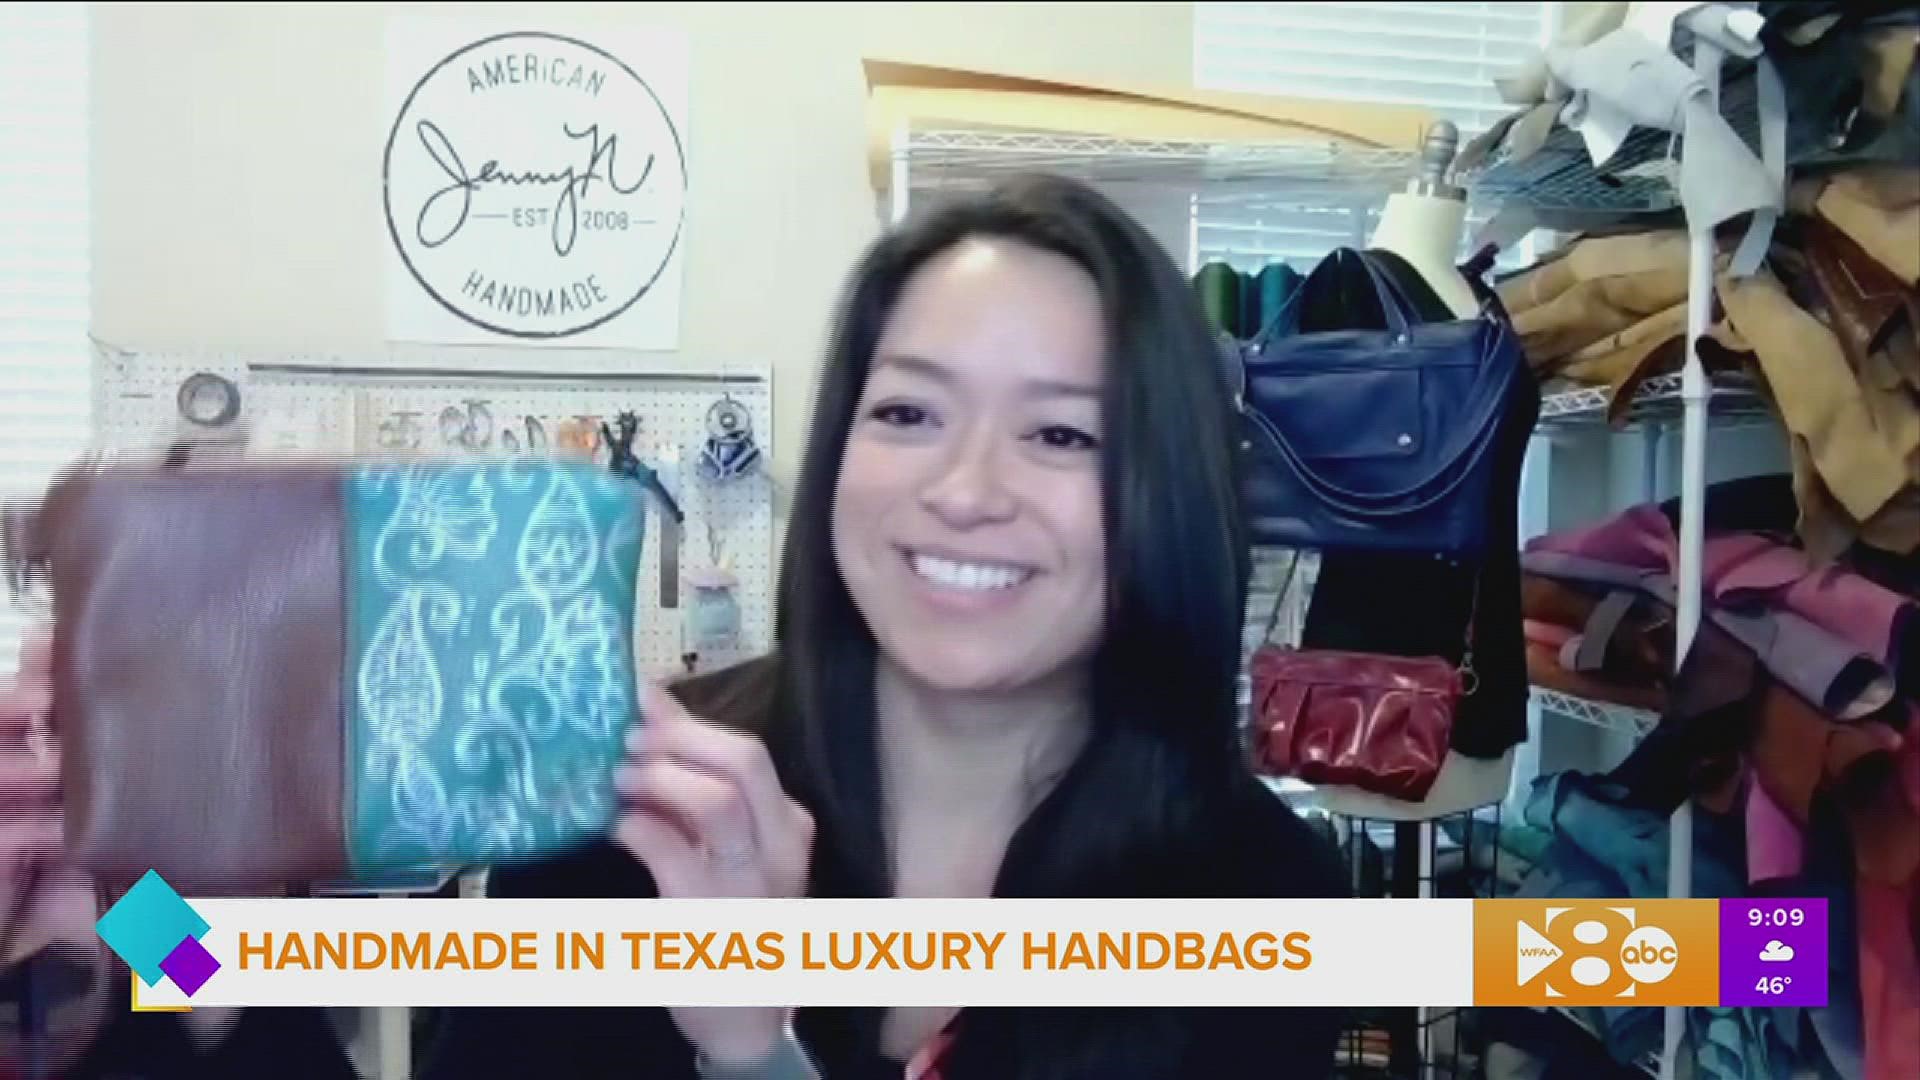 She learned to knit as a way to communicate with her Vietnamese grandmother.  Find out how this woman put her engineering background to launch her handbag business.